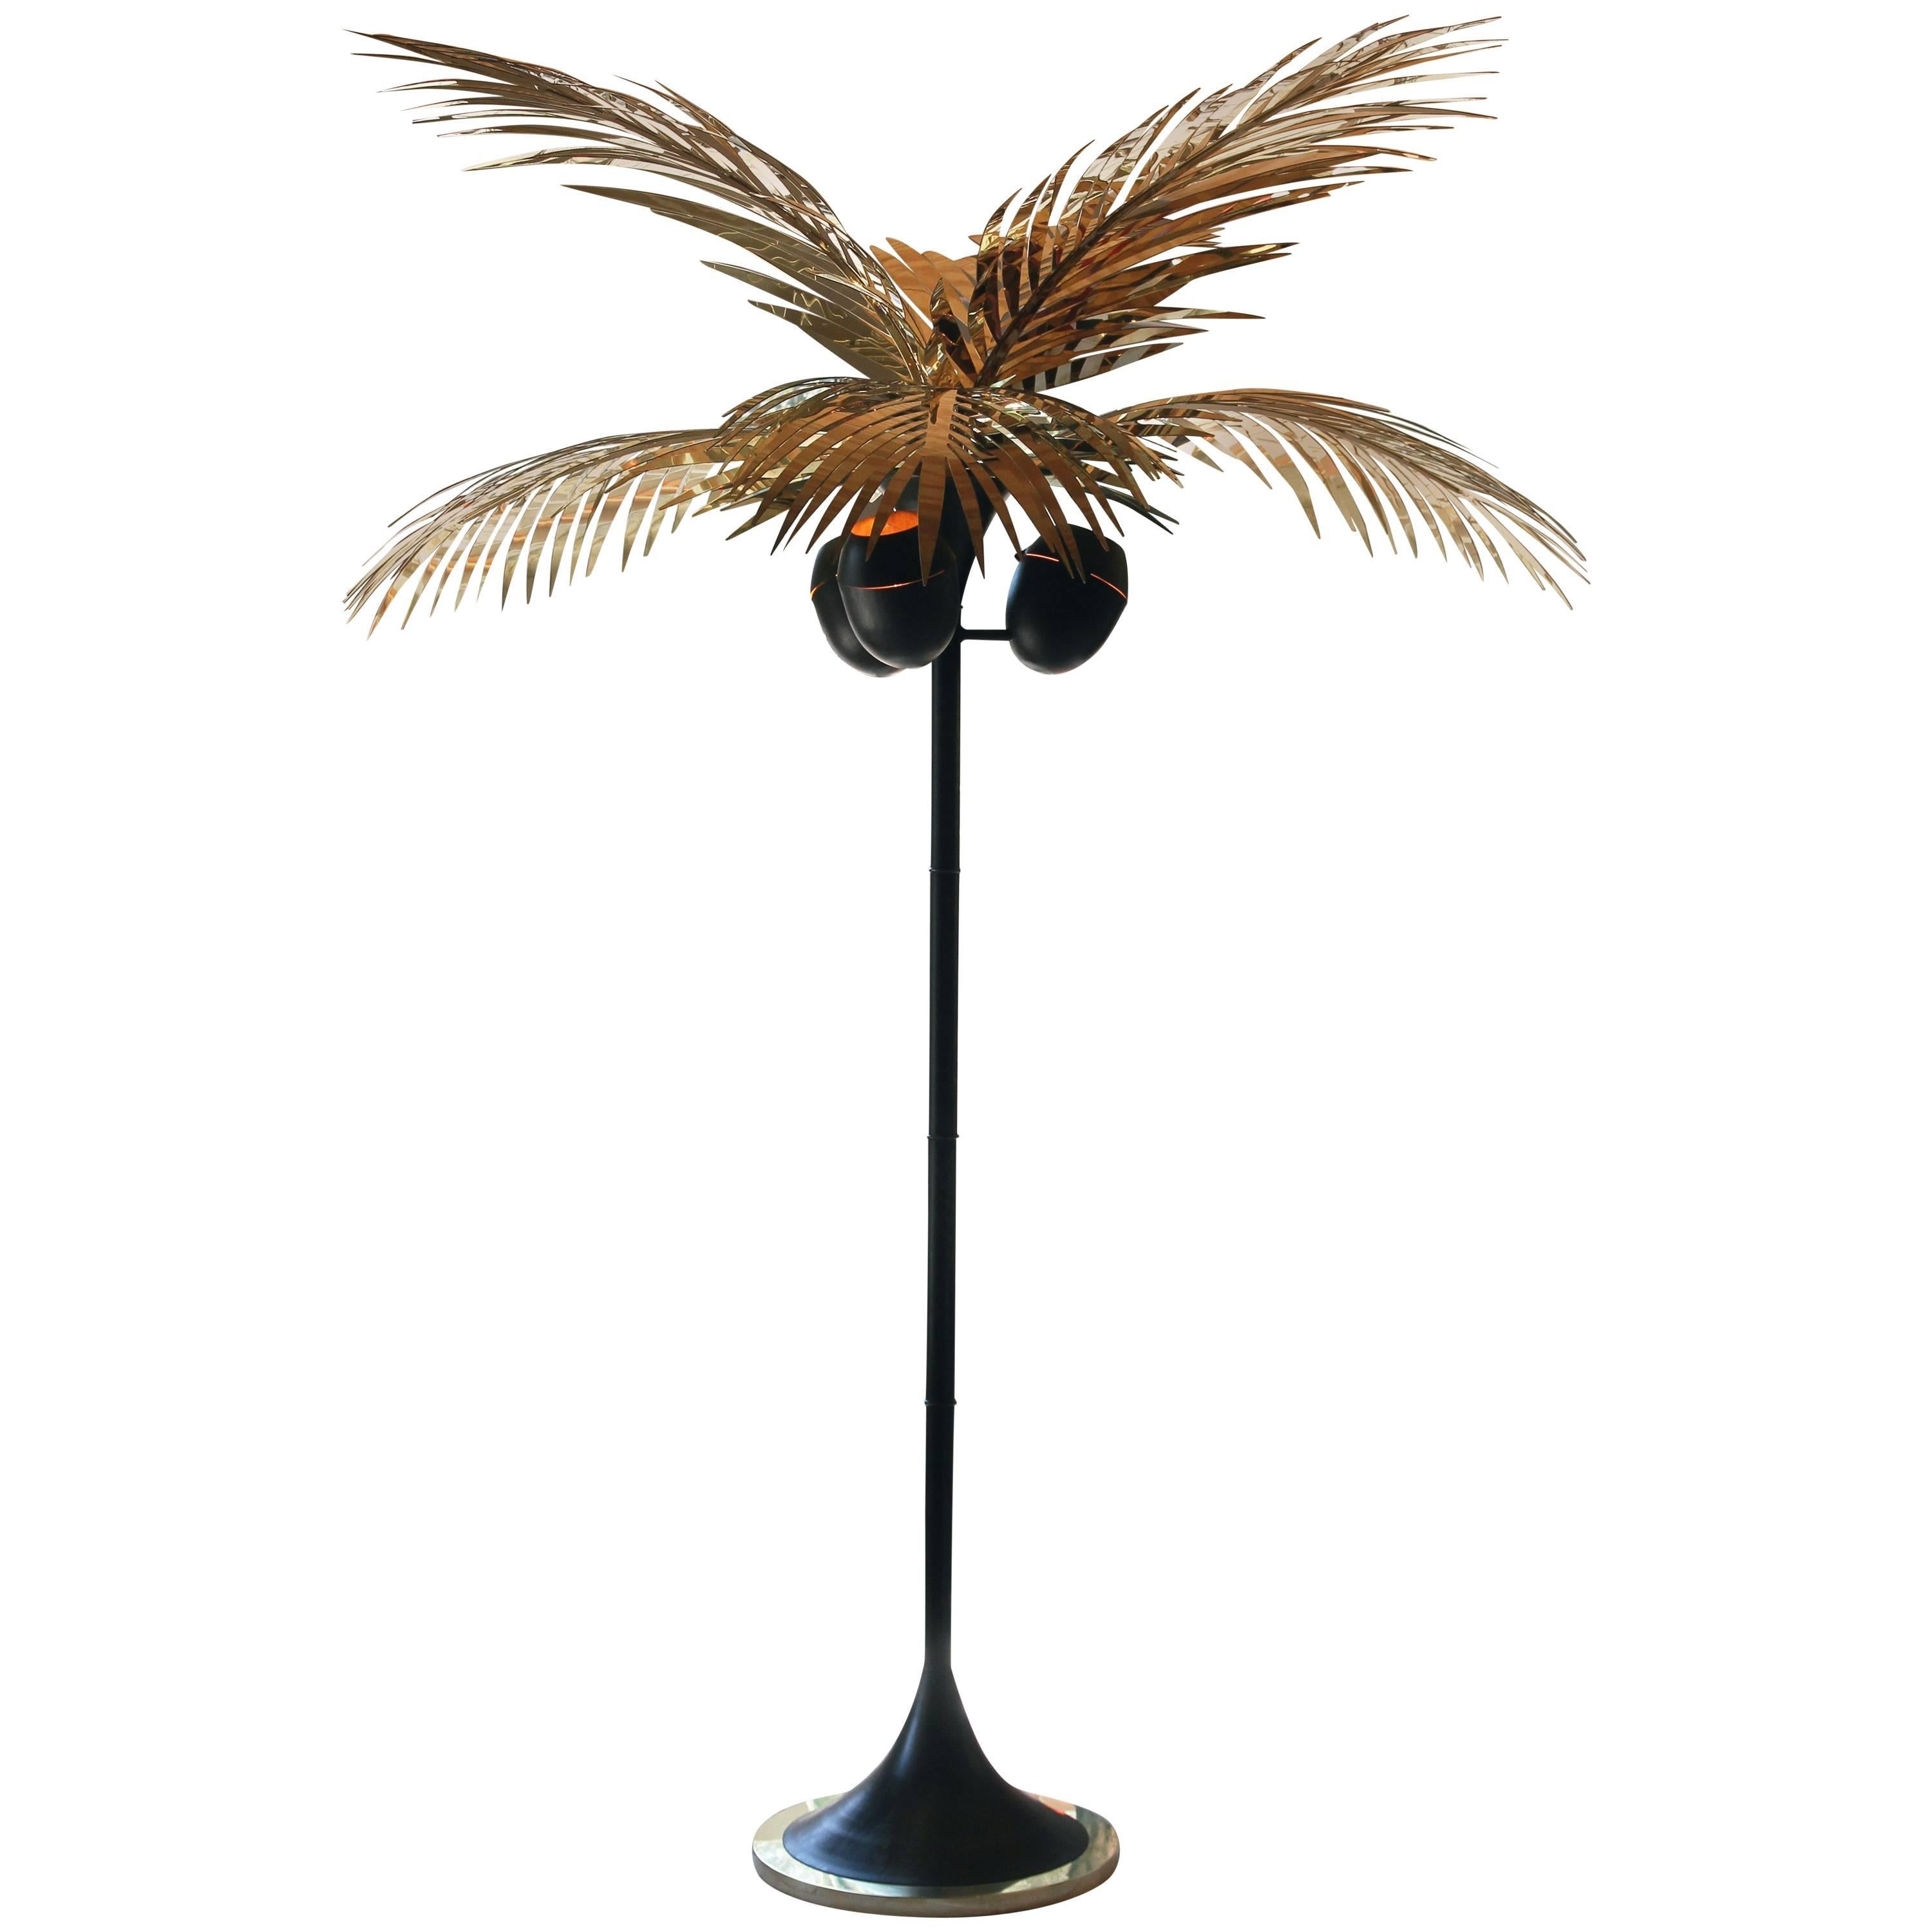 California King Palm Tree Floor Lamp in Polished Brass by Christopher Kreiling